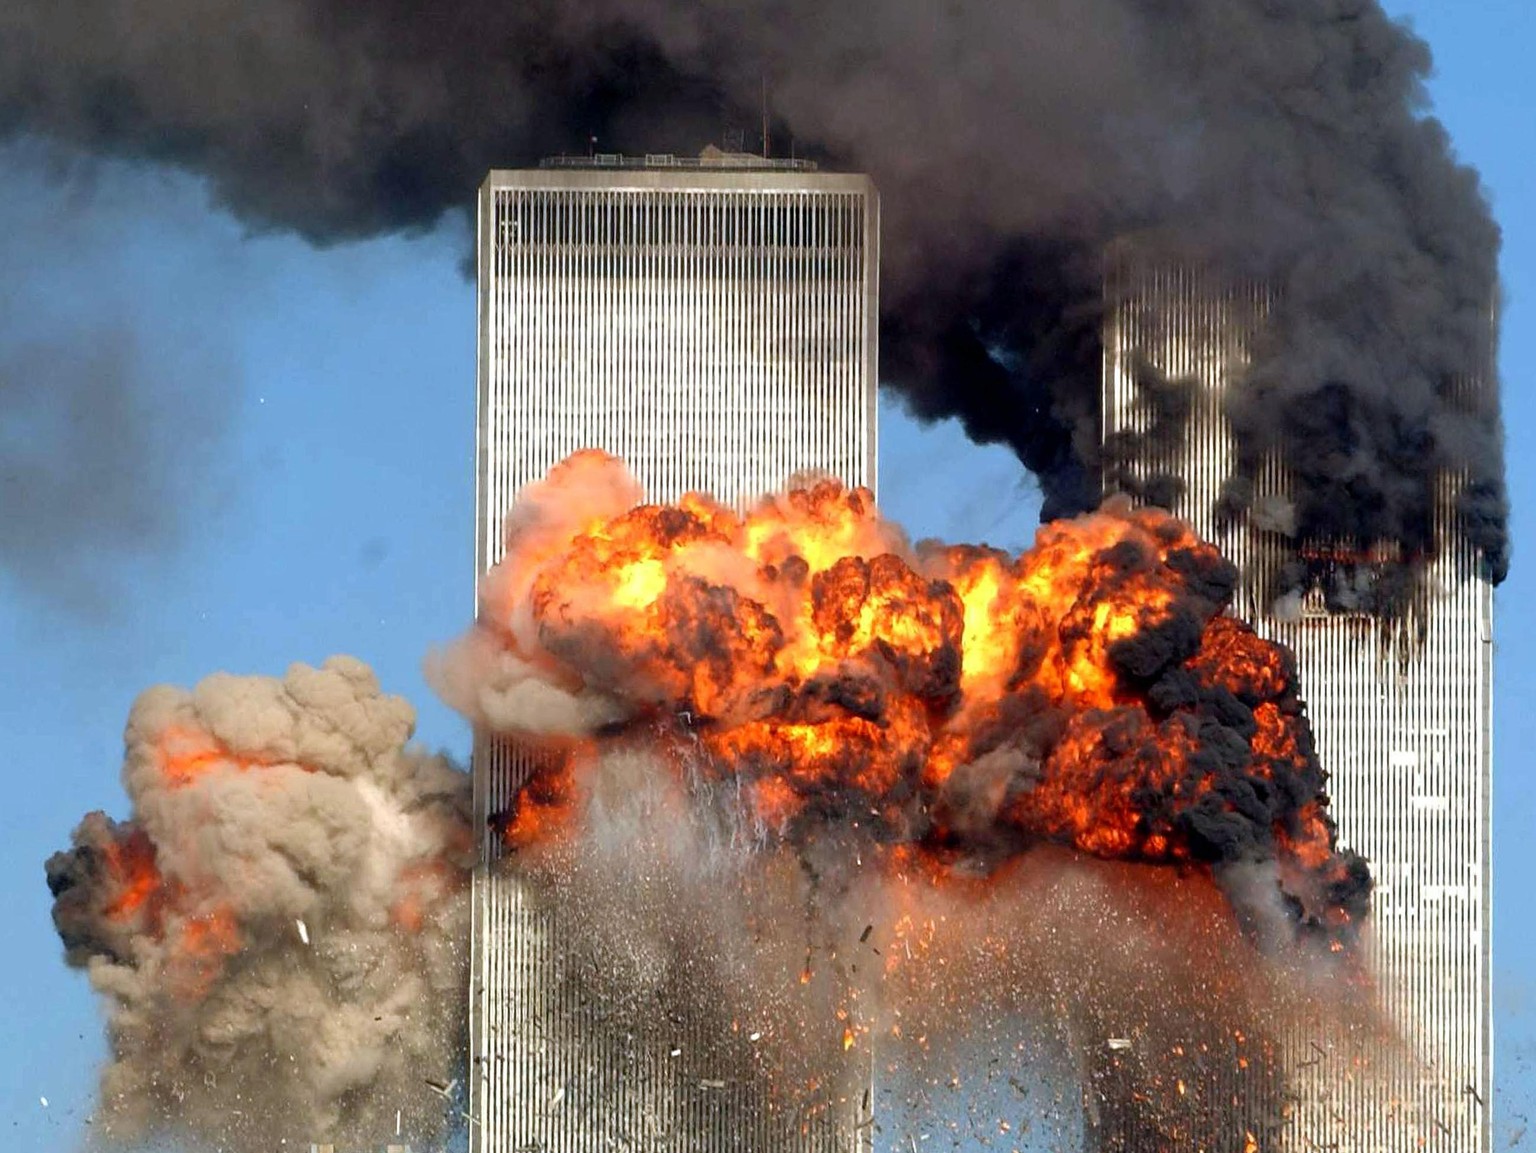 World Trade Center Attacked
NEW YORK - SEPTEMBER 11: Hijacked United Airlines Flight 175 from Boston crashes into the south tower of the World Trade Center and explodes at 9:03 a.m. on September 11, 2 ...